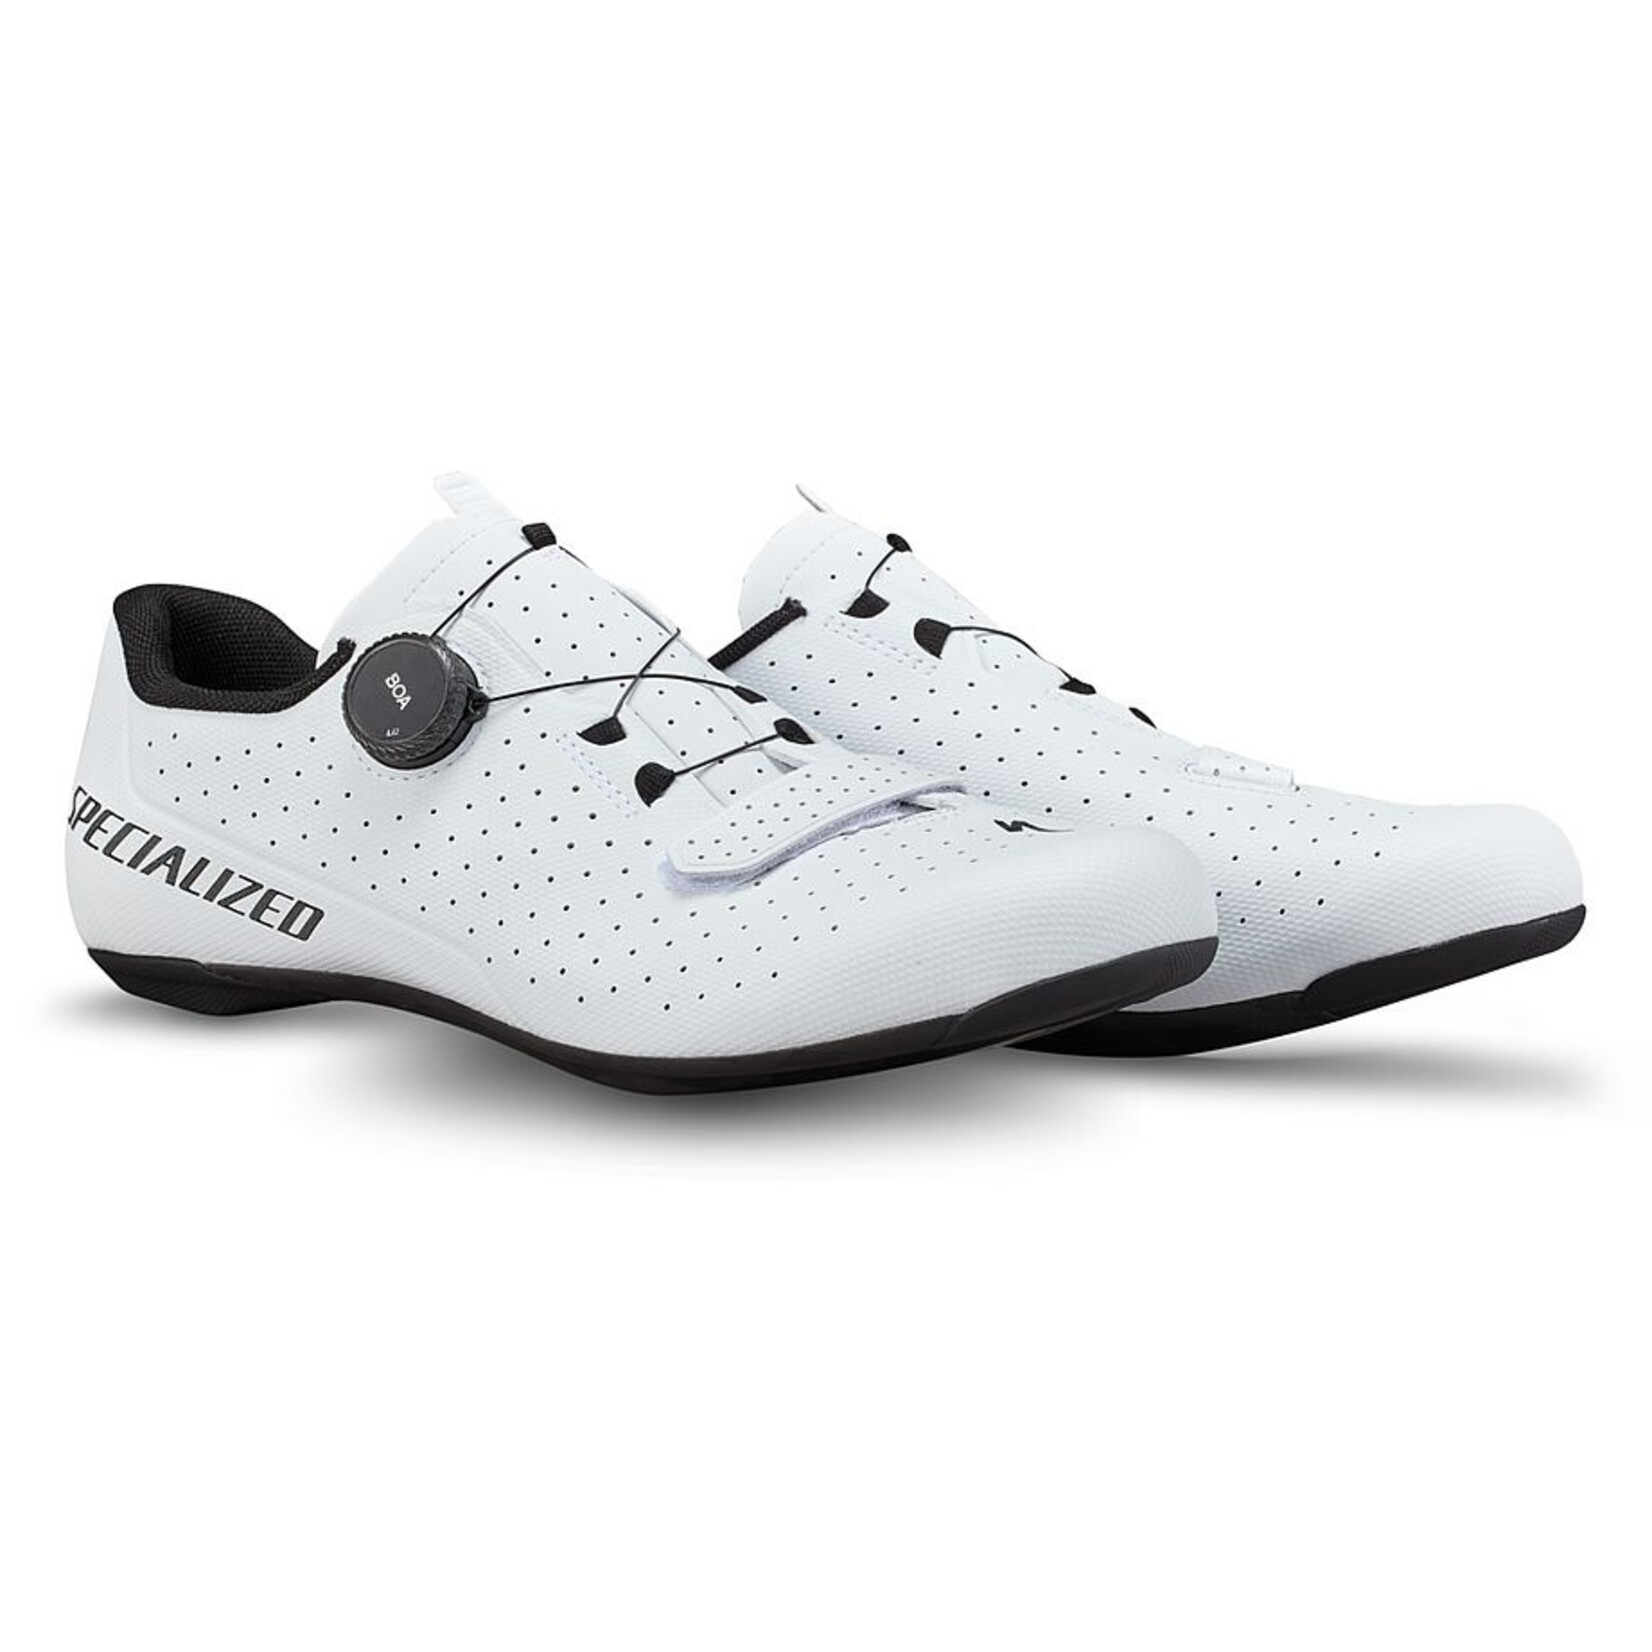 Specialized Torch 2.0 Road Shoes in White